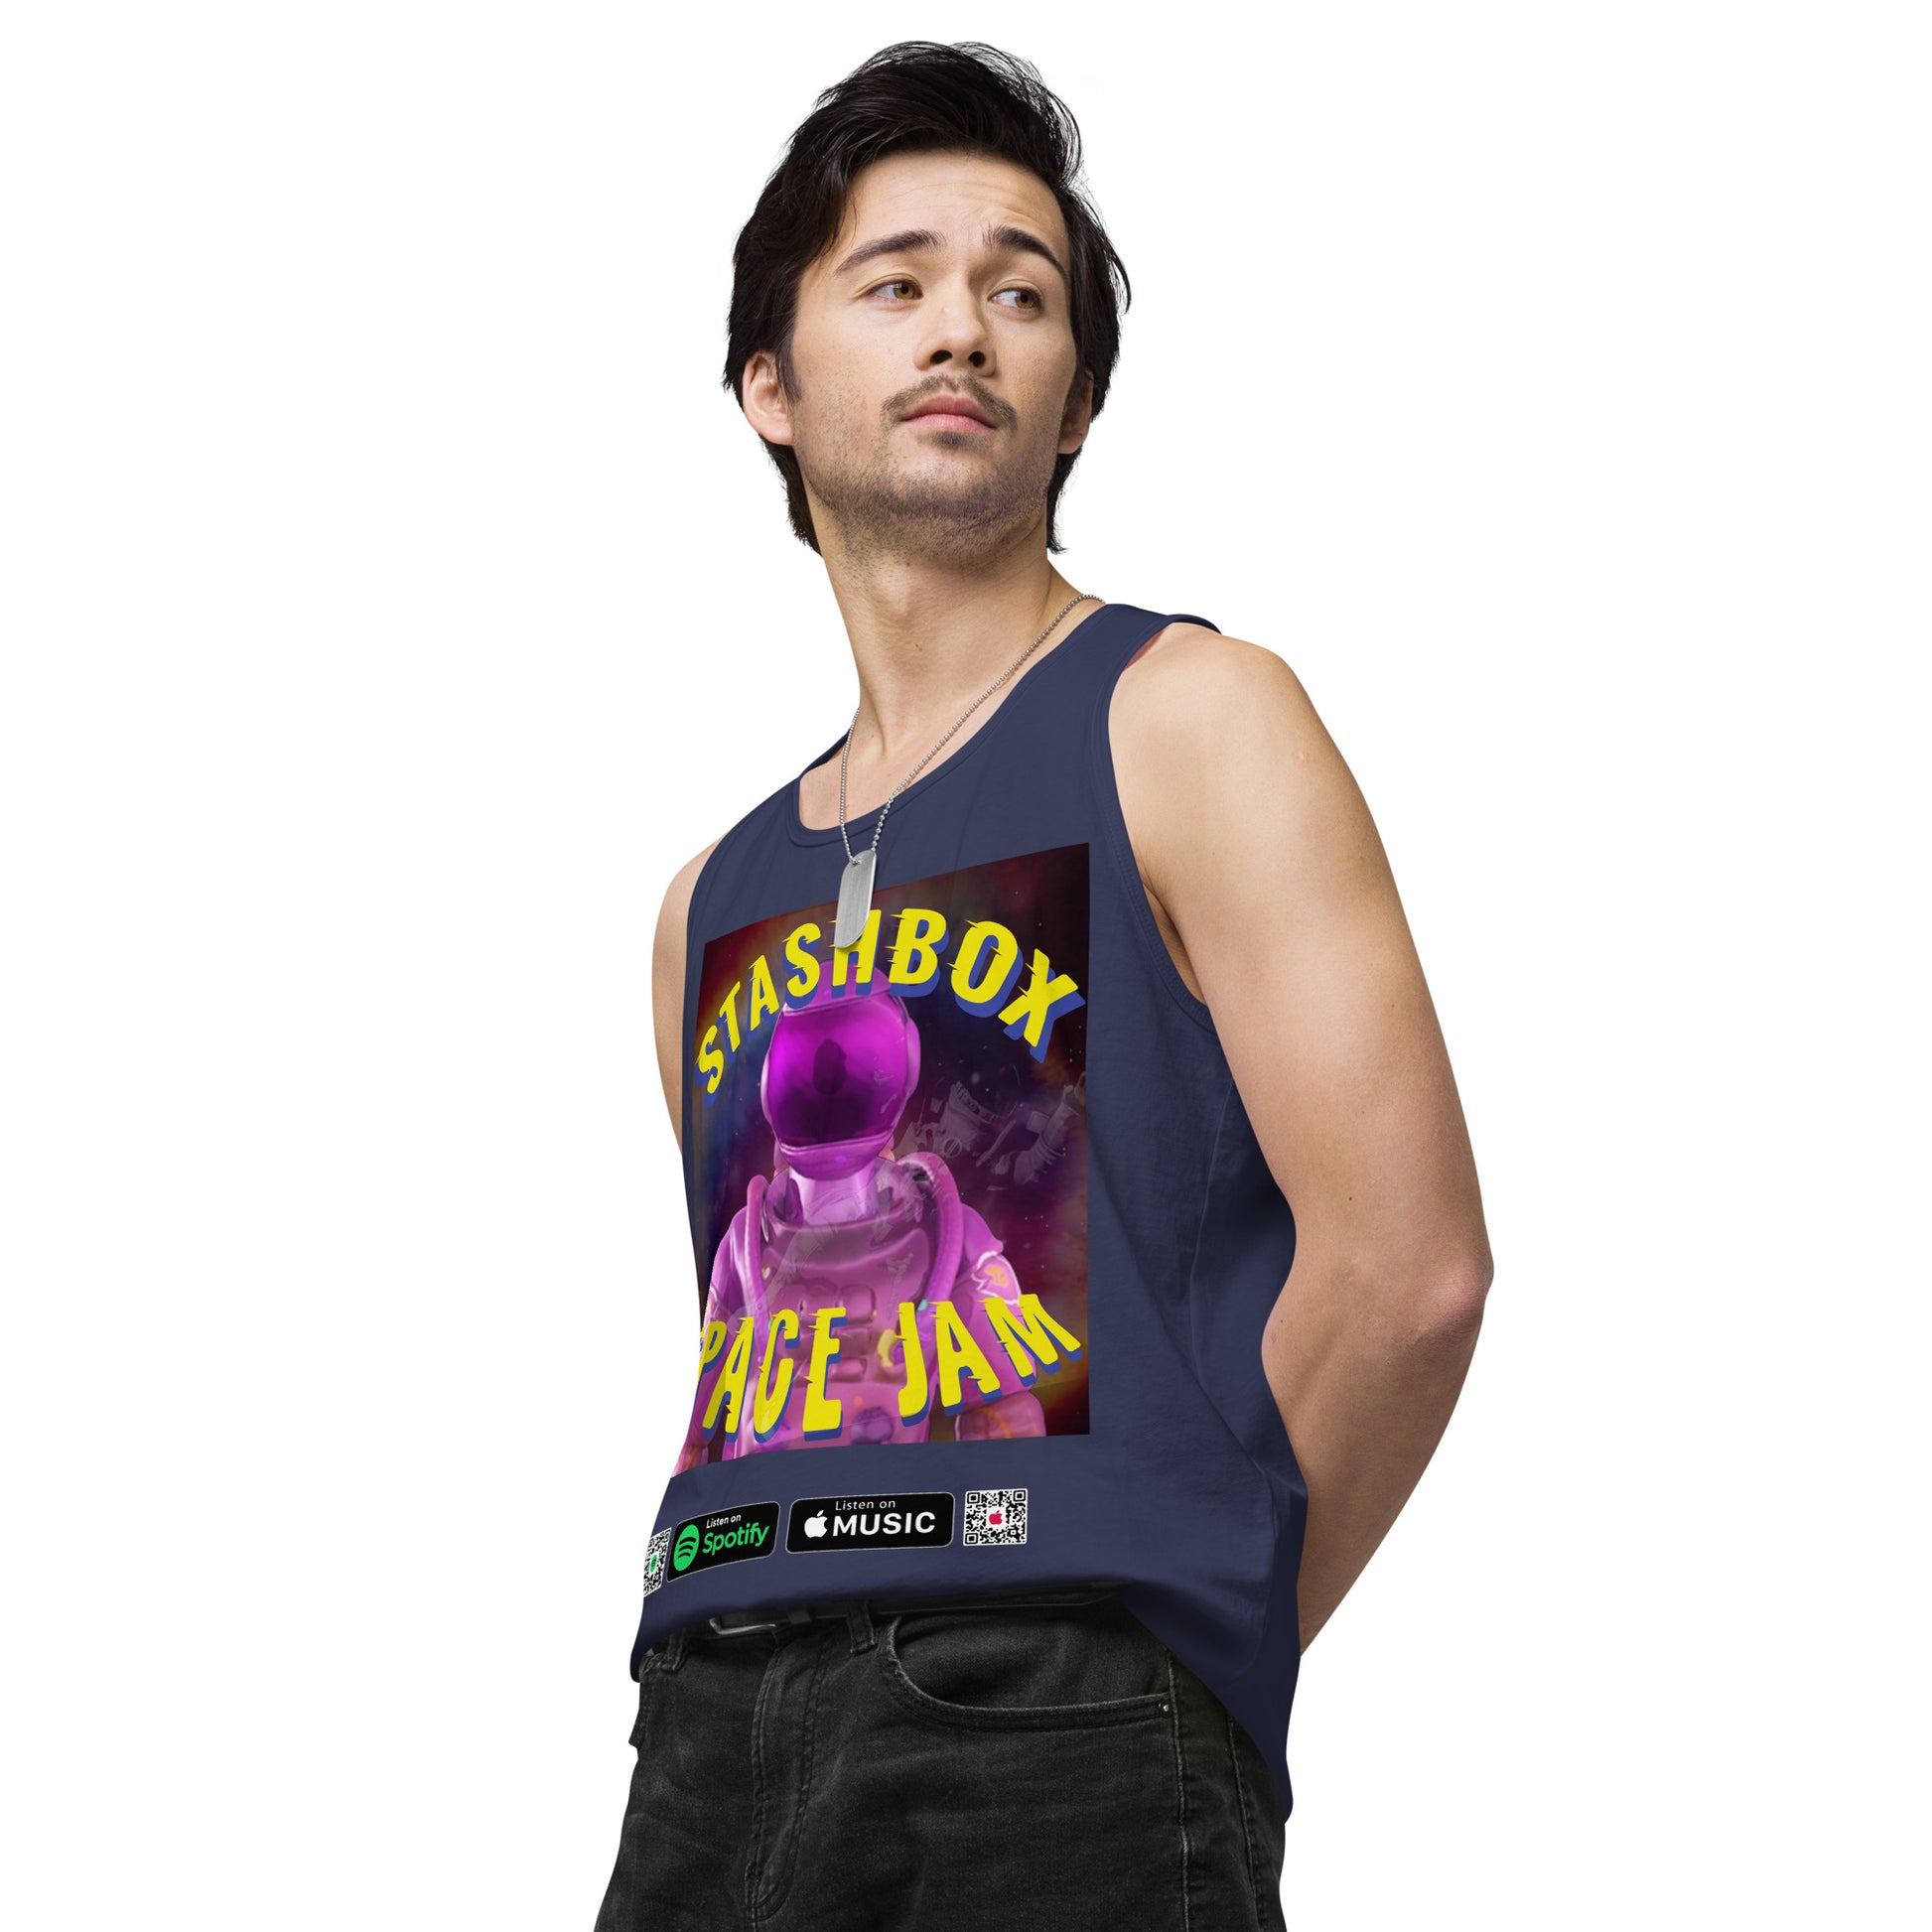 Fashion Beyond Earth: Space Jam - Stashbox Men’s Premium Tank Top, Design #005. Step into intergalactic fashion with this premium tank. A fusion of cosmic art and comfort, perfect for those who dream beyond the stars. #StashboxGalacticArt #SpaceEnthusiast #AstronomyFashion